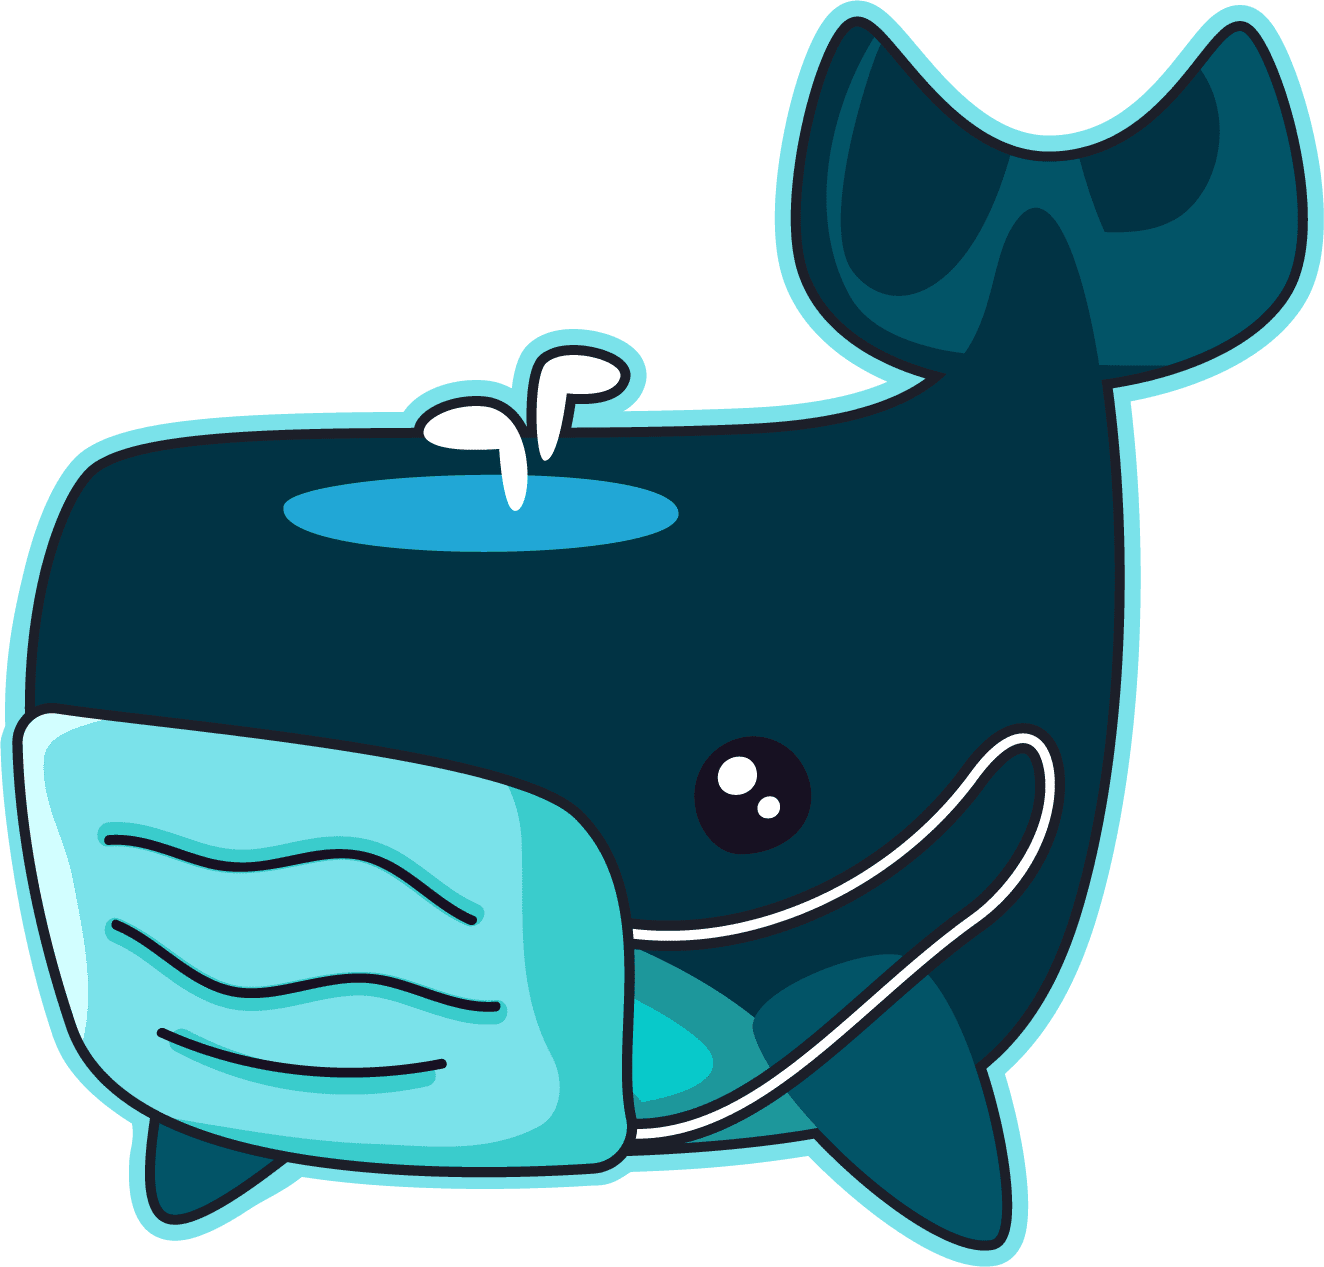 The Covid Whales logo